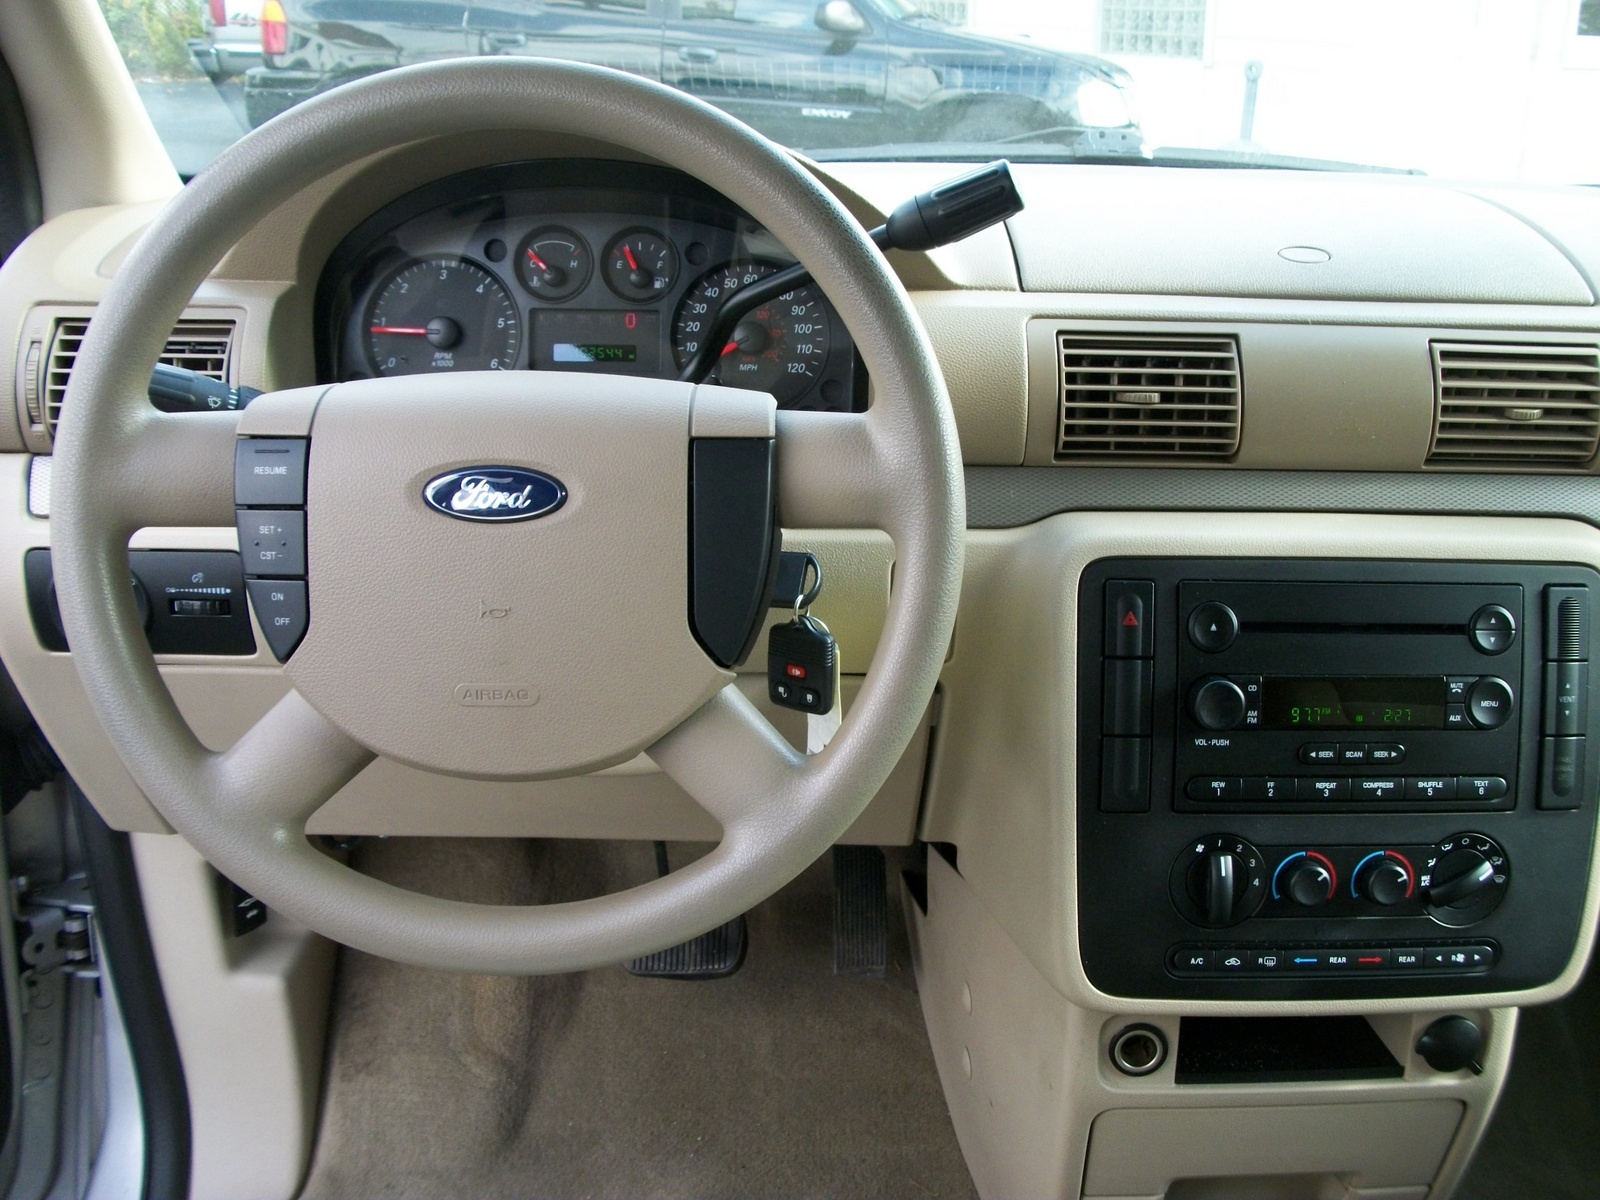 Ford freestar interior pictures #5